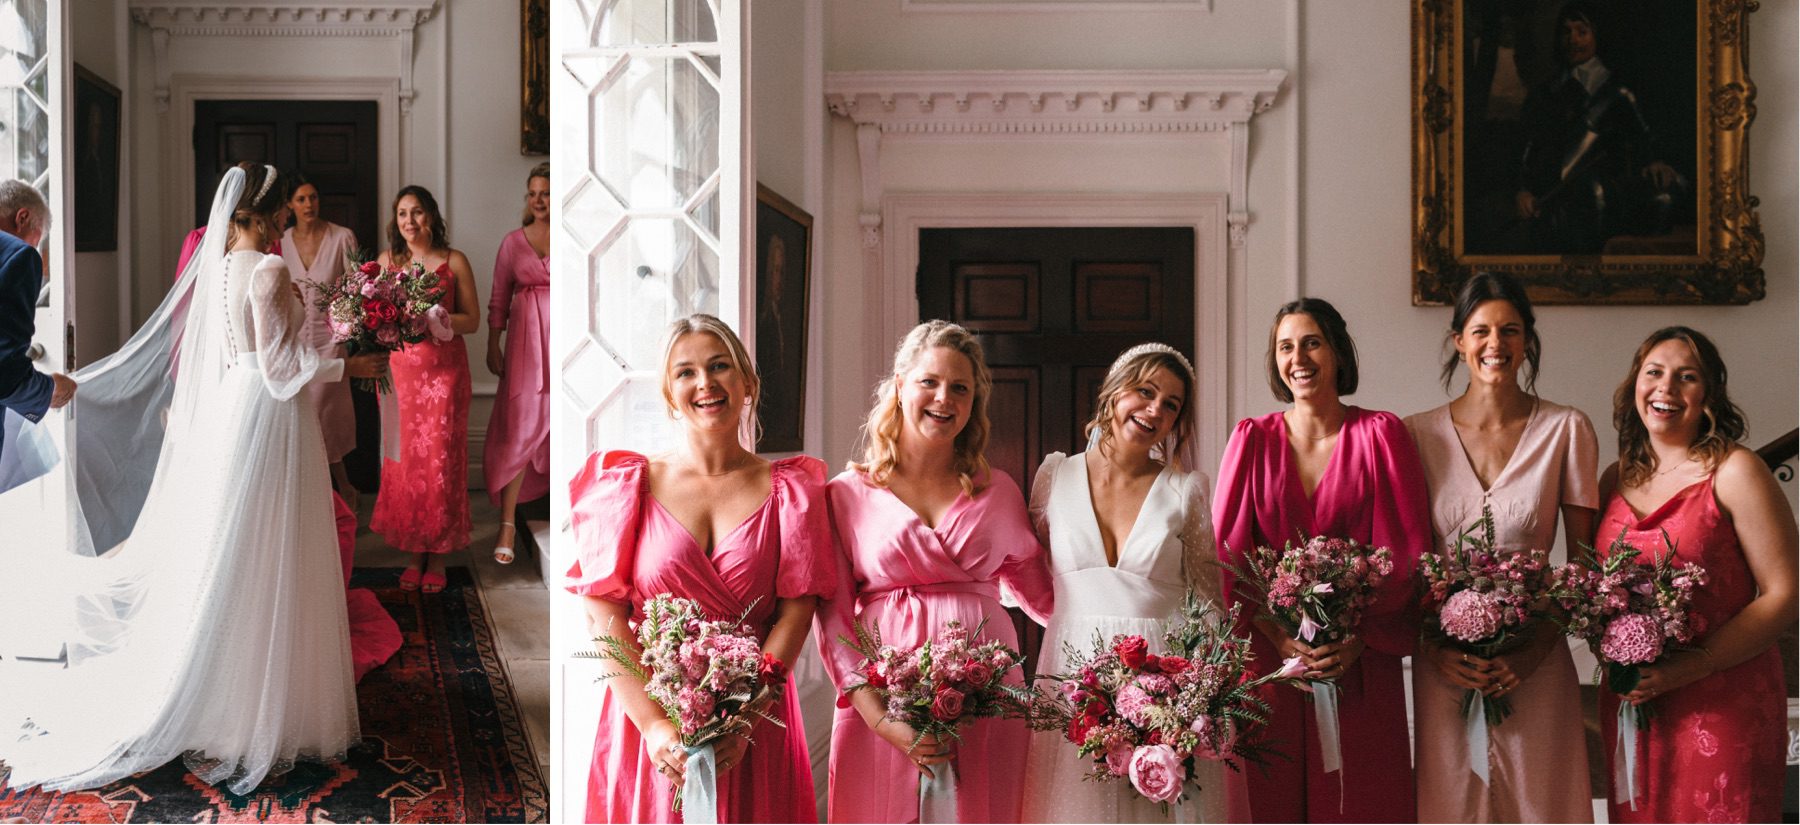 Natural and relaxed photography captured by Wedding photographer Devon & Cornwall_Freckle Photography